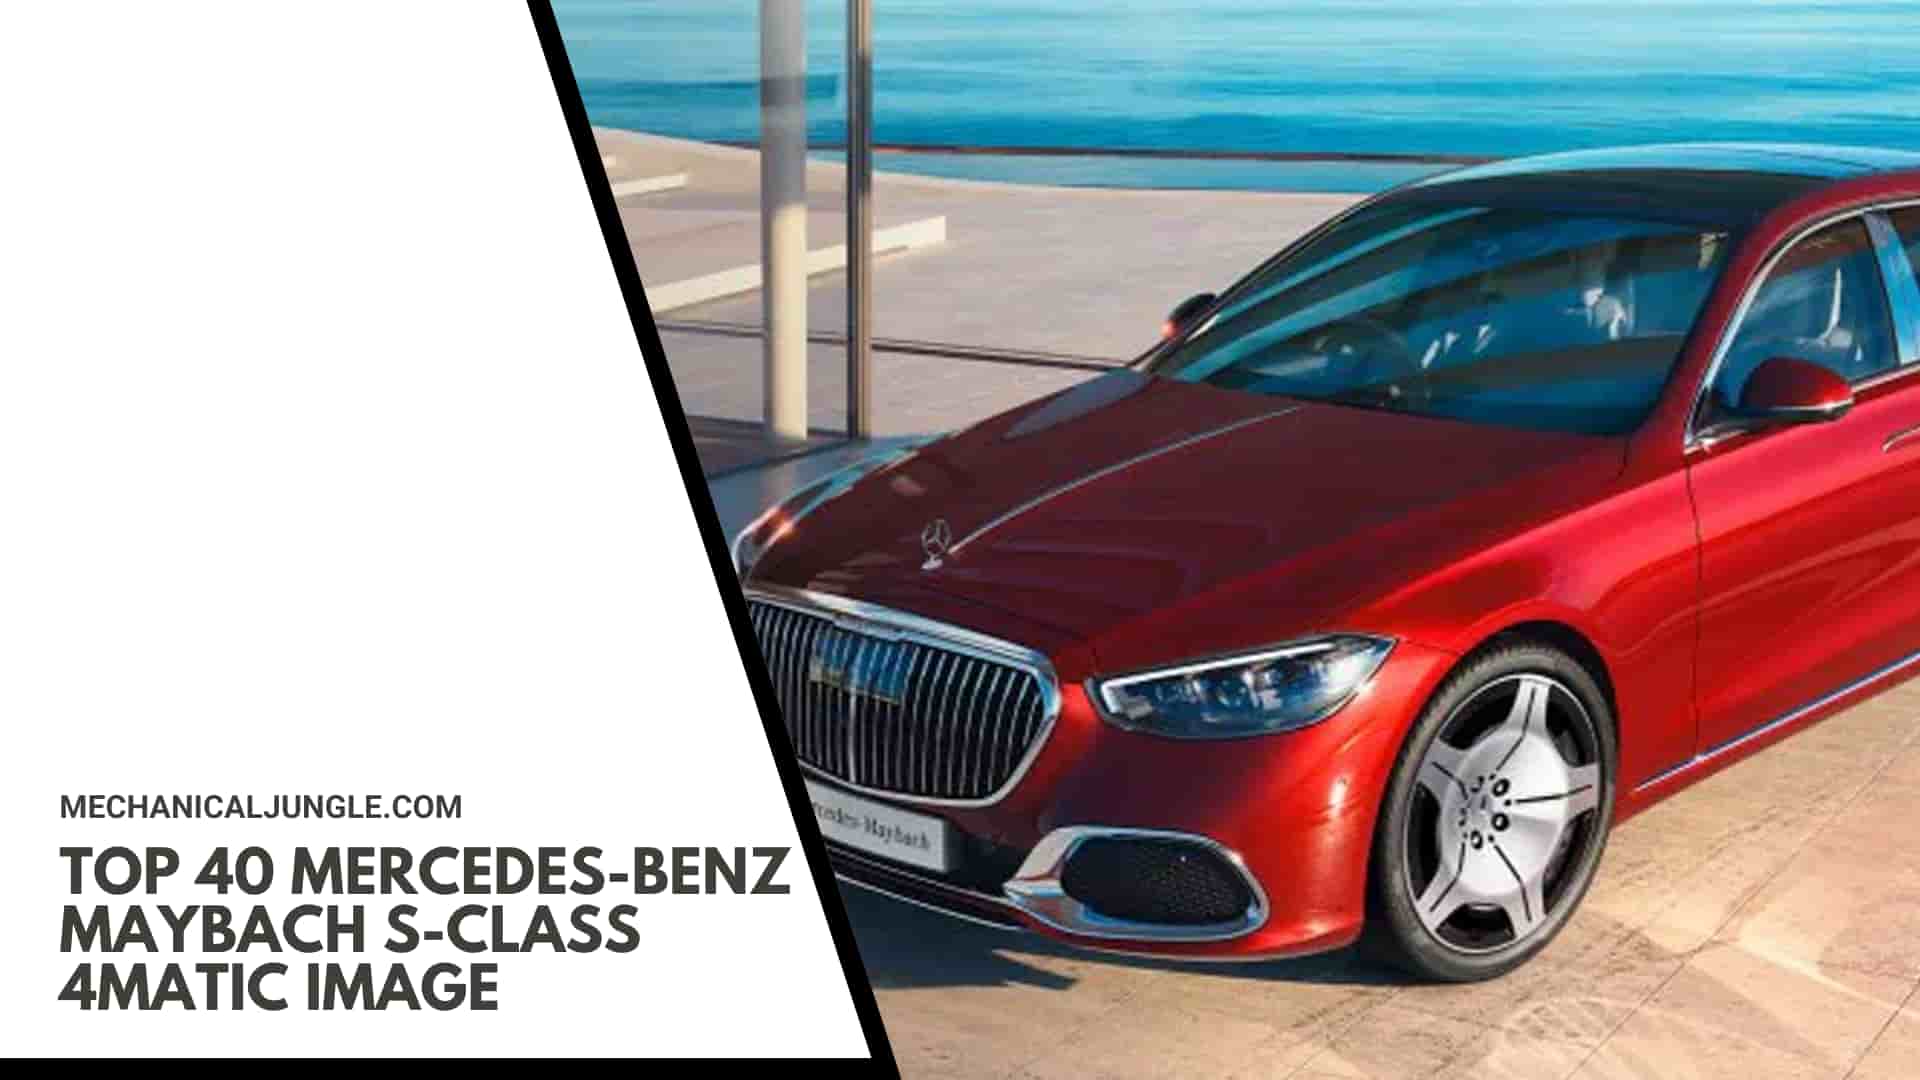 Top 40 Mercedes-Benz Maybach S-Class 4MATIC Image